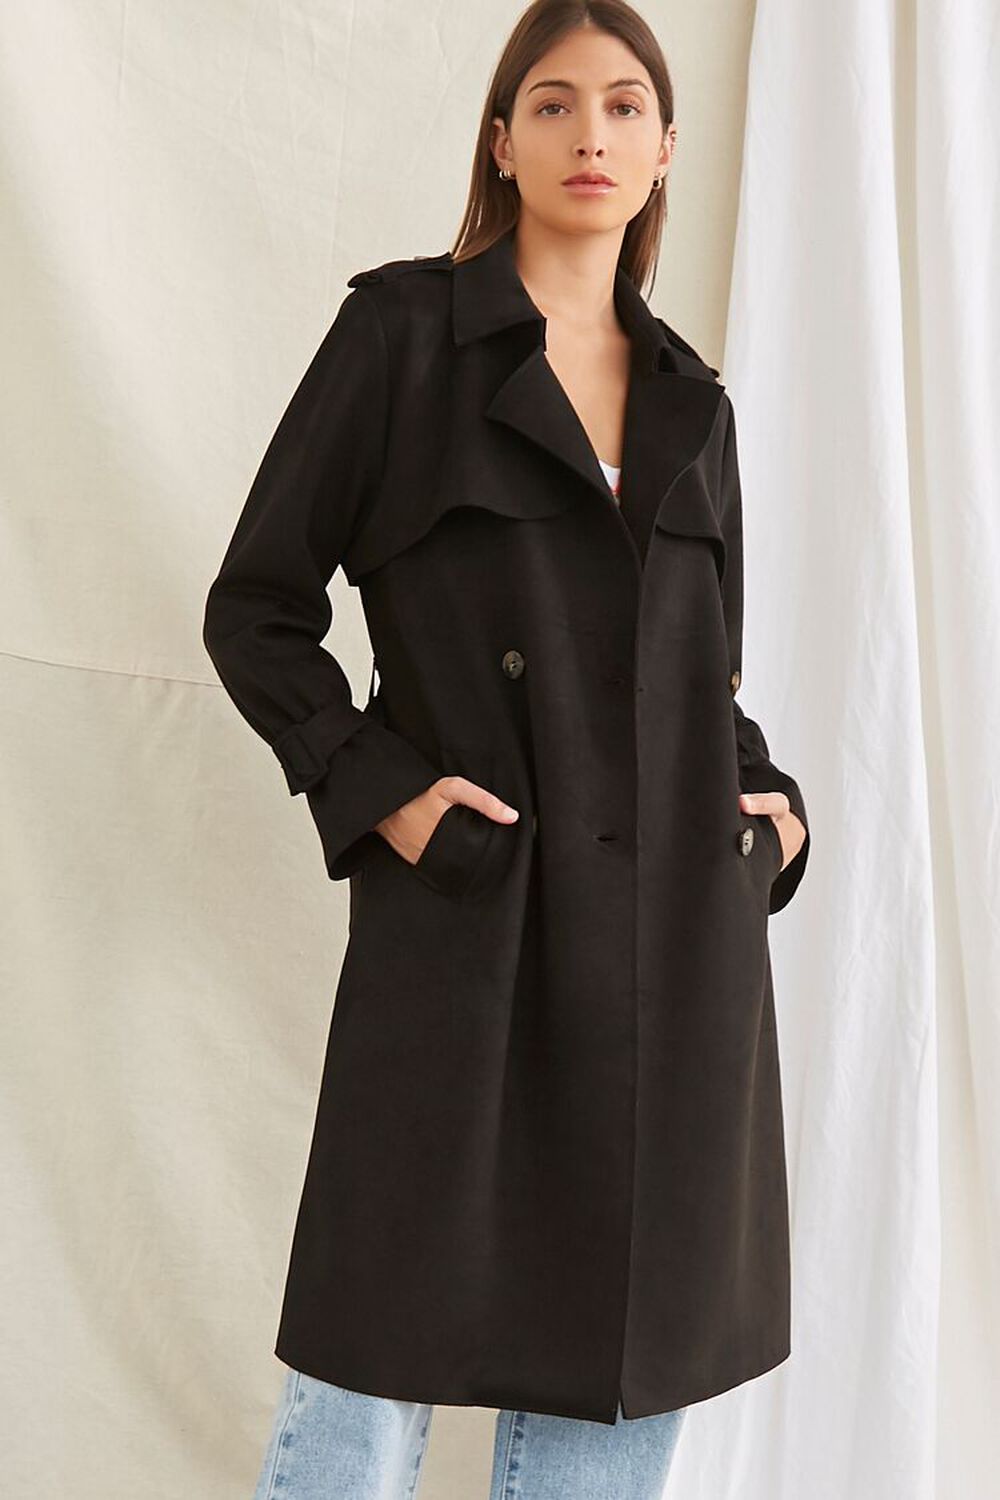 BLACK Belted Faux Suede Trench Jacket, image 1